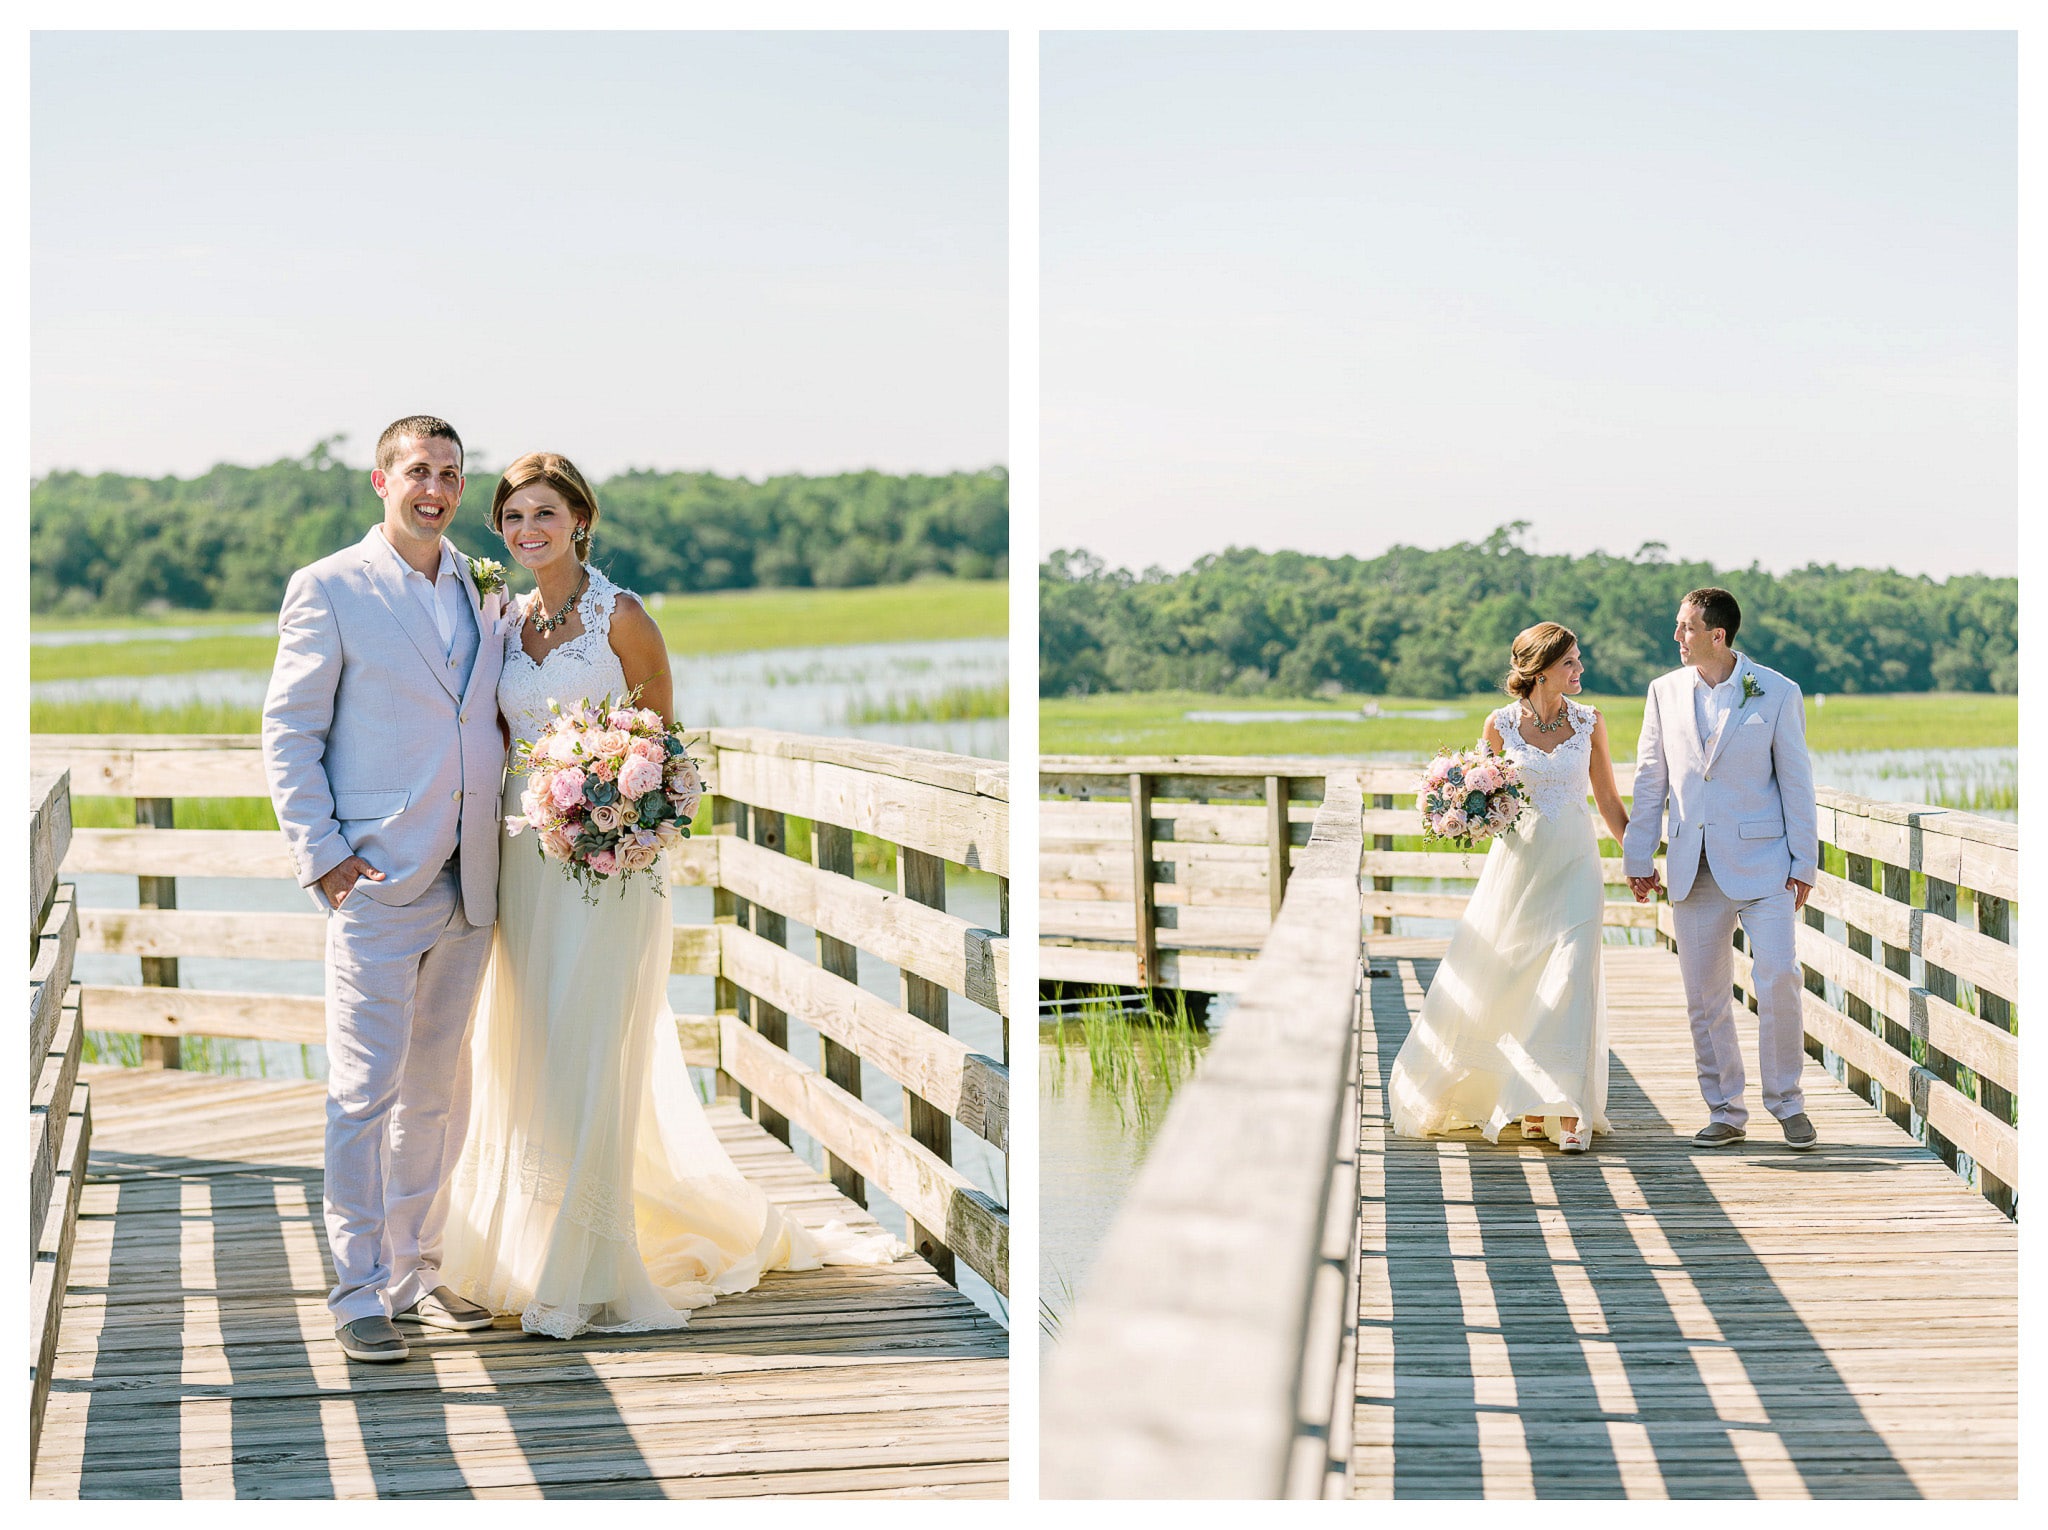 More walkway Shots of the couple with the beautiful scenery in the background - Venue - Beach House Gulf Stream Breeze, Beach Realty Catering and Cake - Buttercream Cakes and Catering, LLC Flowers - Callas Florist Event Rentals - Event Works DJ - Scott Shaw